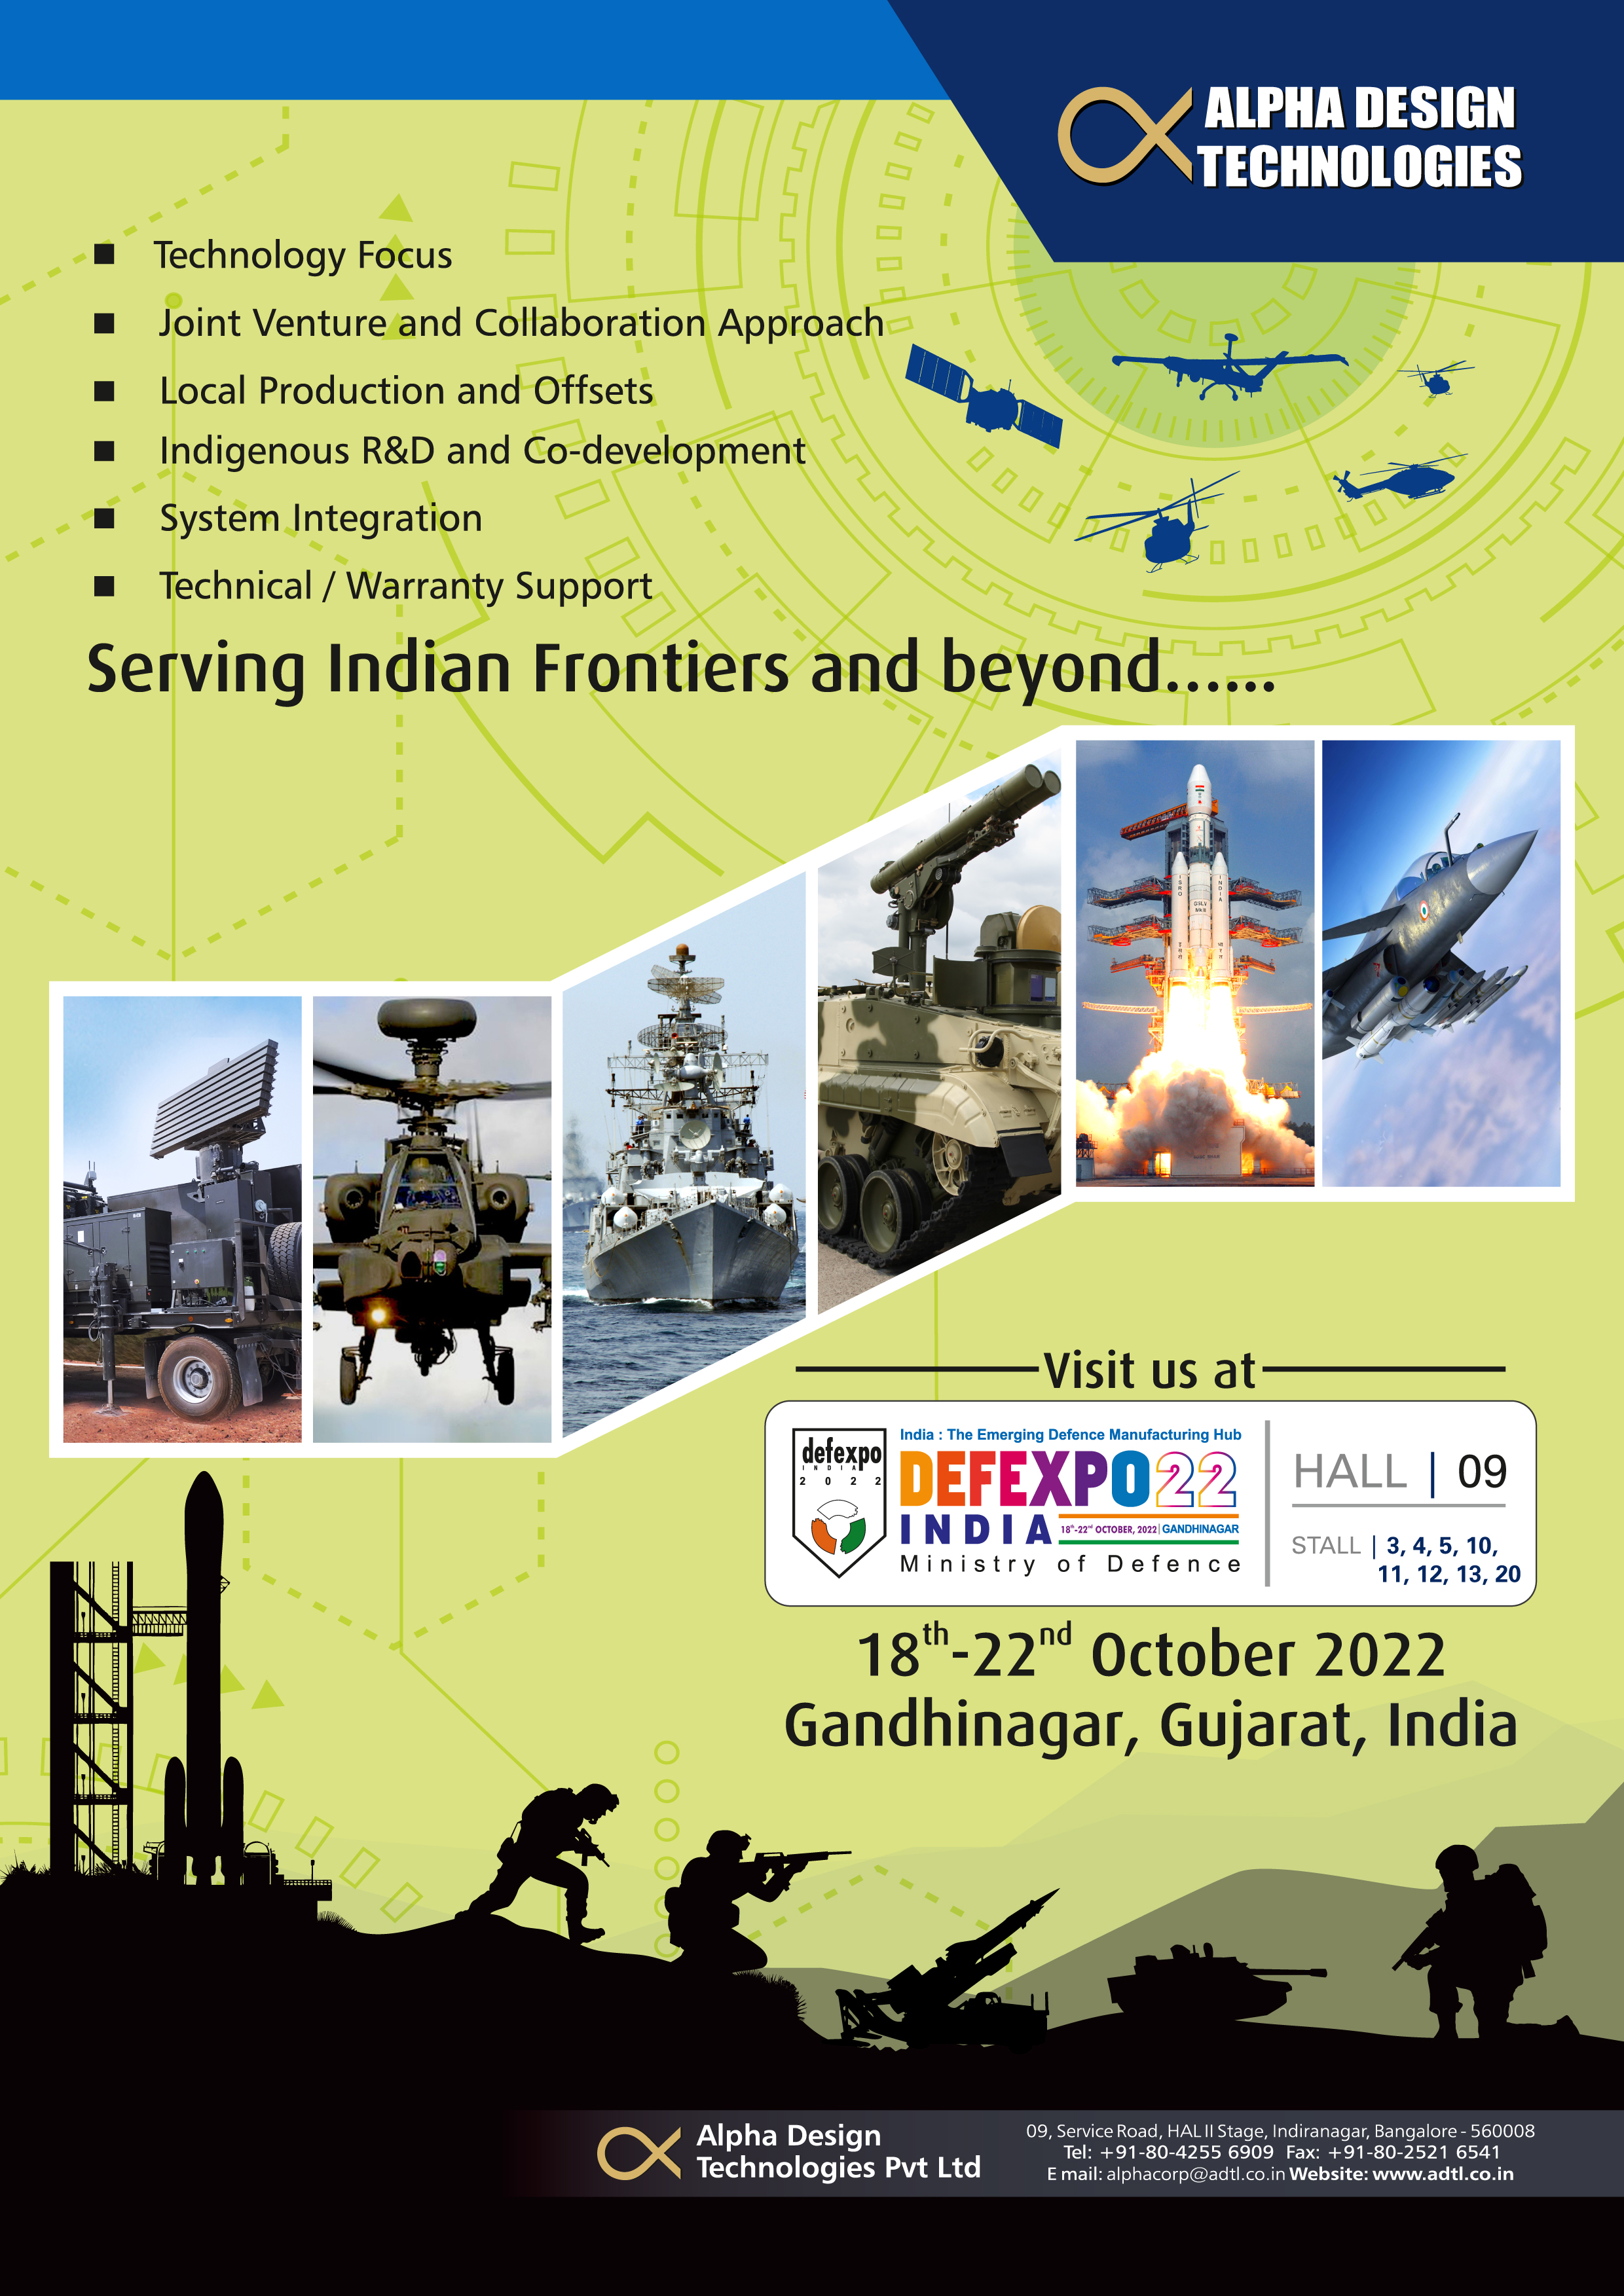 DEFEXPO 2022 INDIA Ministry of Defence